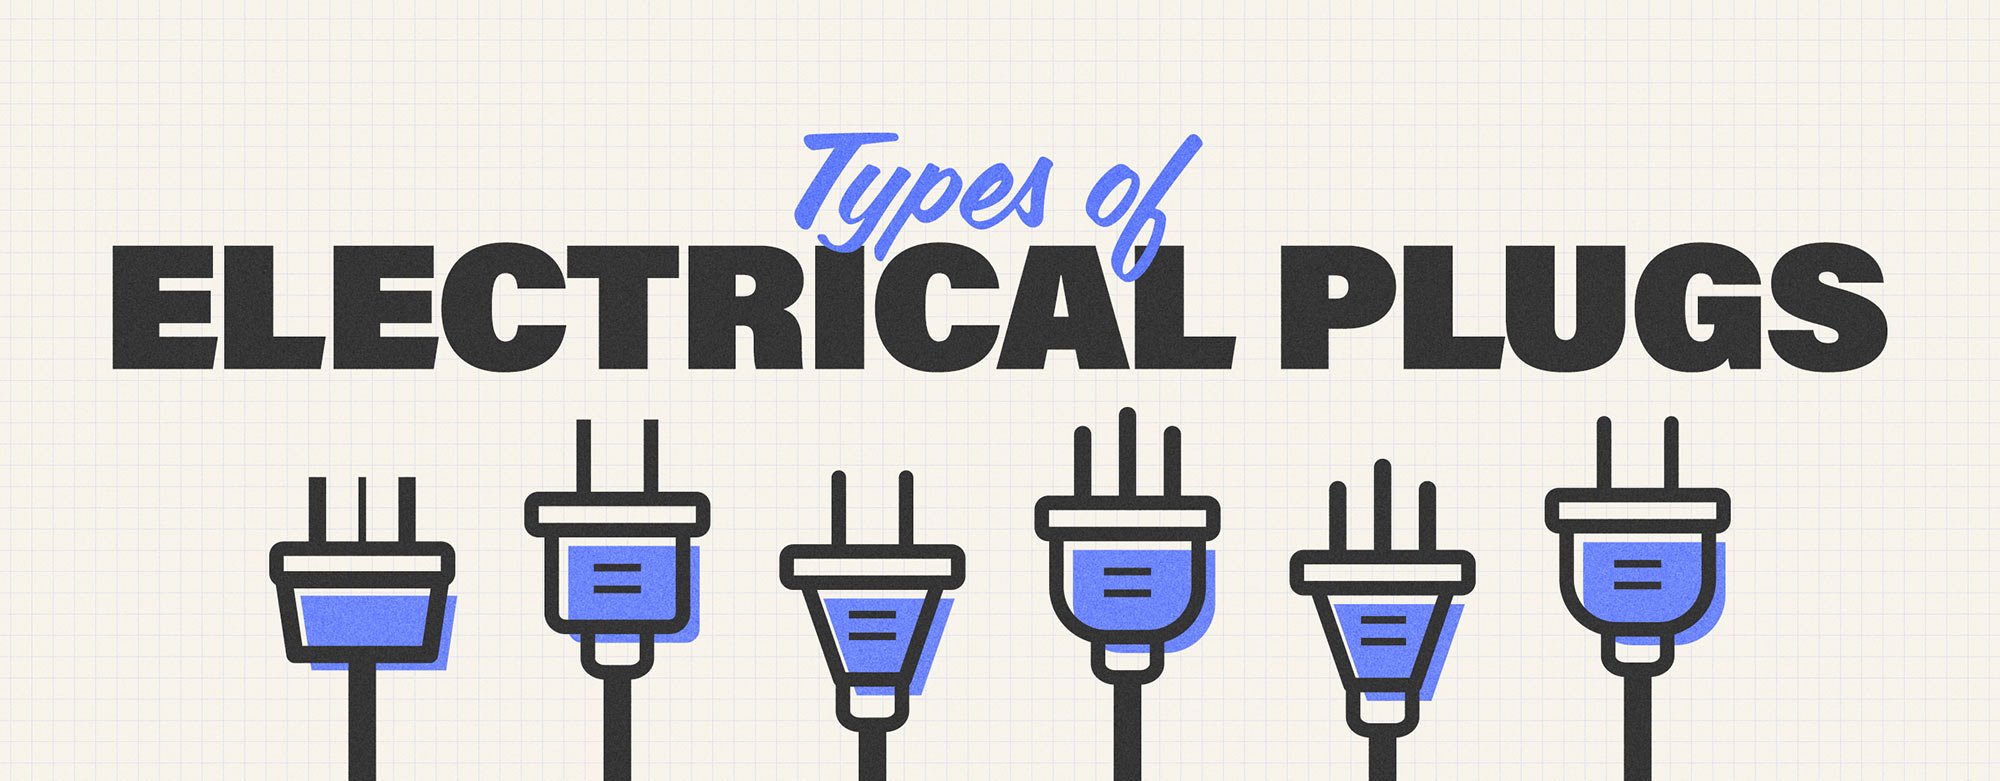 Types of Electrical Plugs 